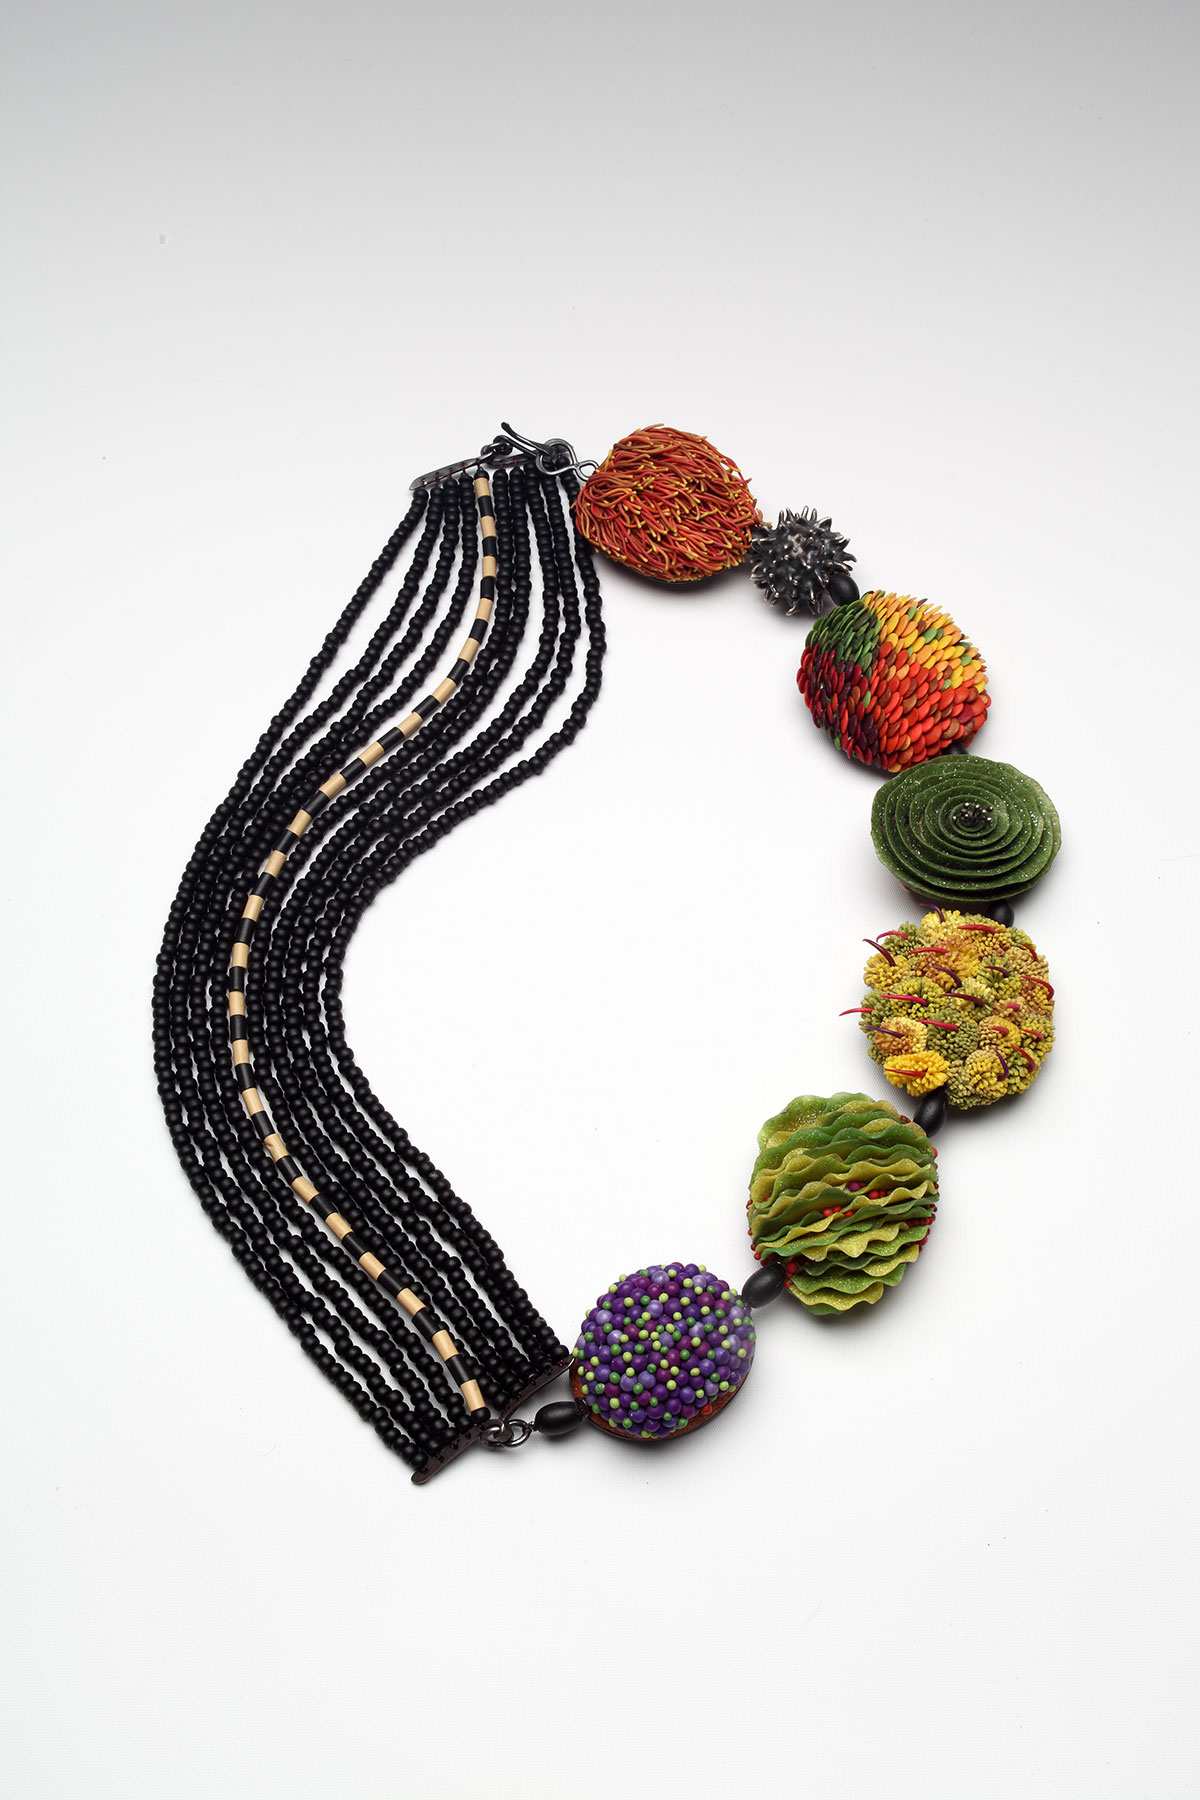 Neckpiece with strings of beads on one half and various organic shapes on the other